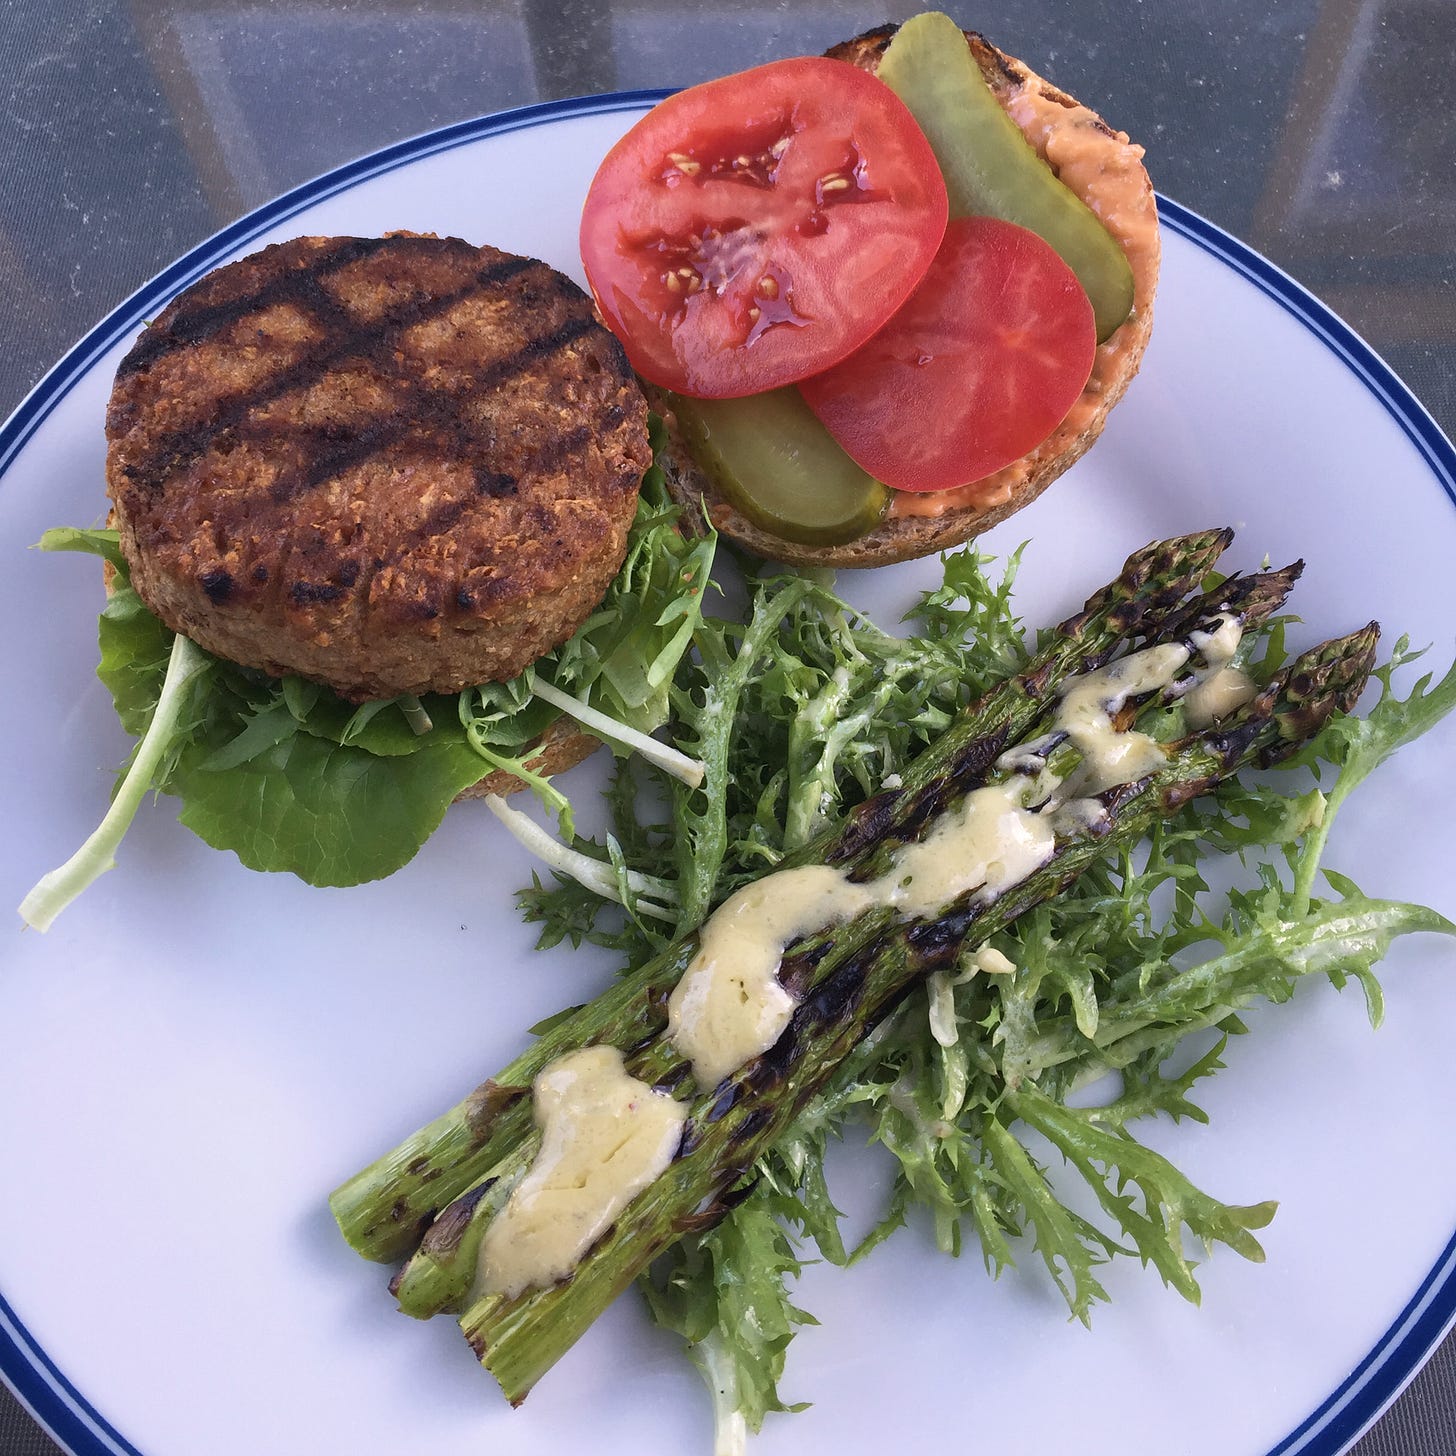 on a white plate, two halves of an open burger next to an endive salad topped with spears of grilled asparagus. The burger has a Beyond patty and lettuce on one side and orange burger sauce, tomato, and pickle on the other.